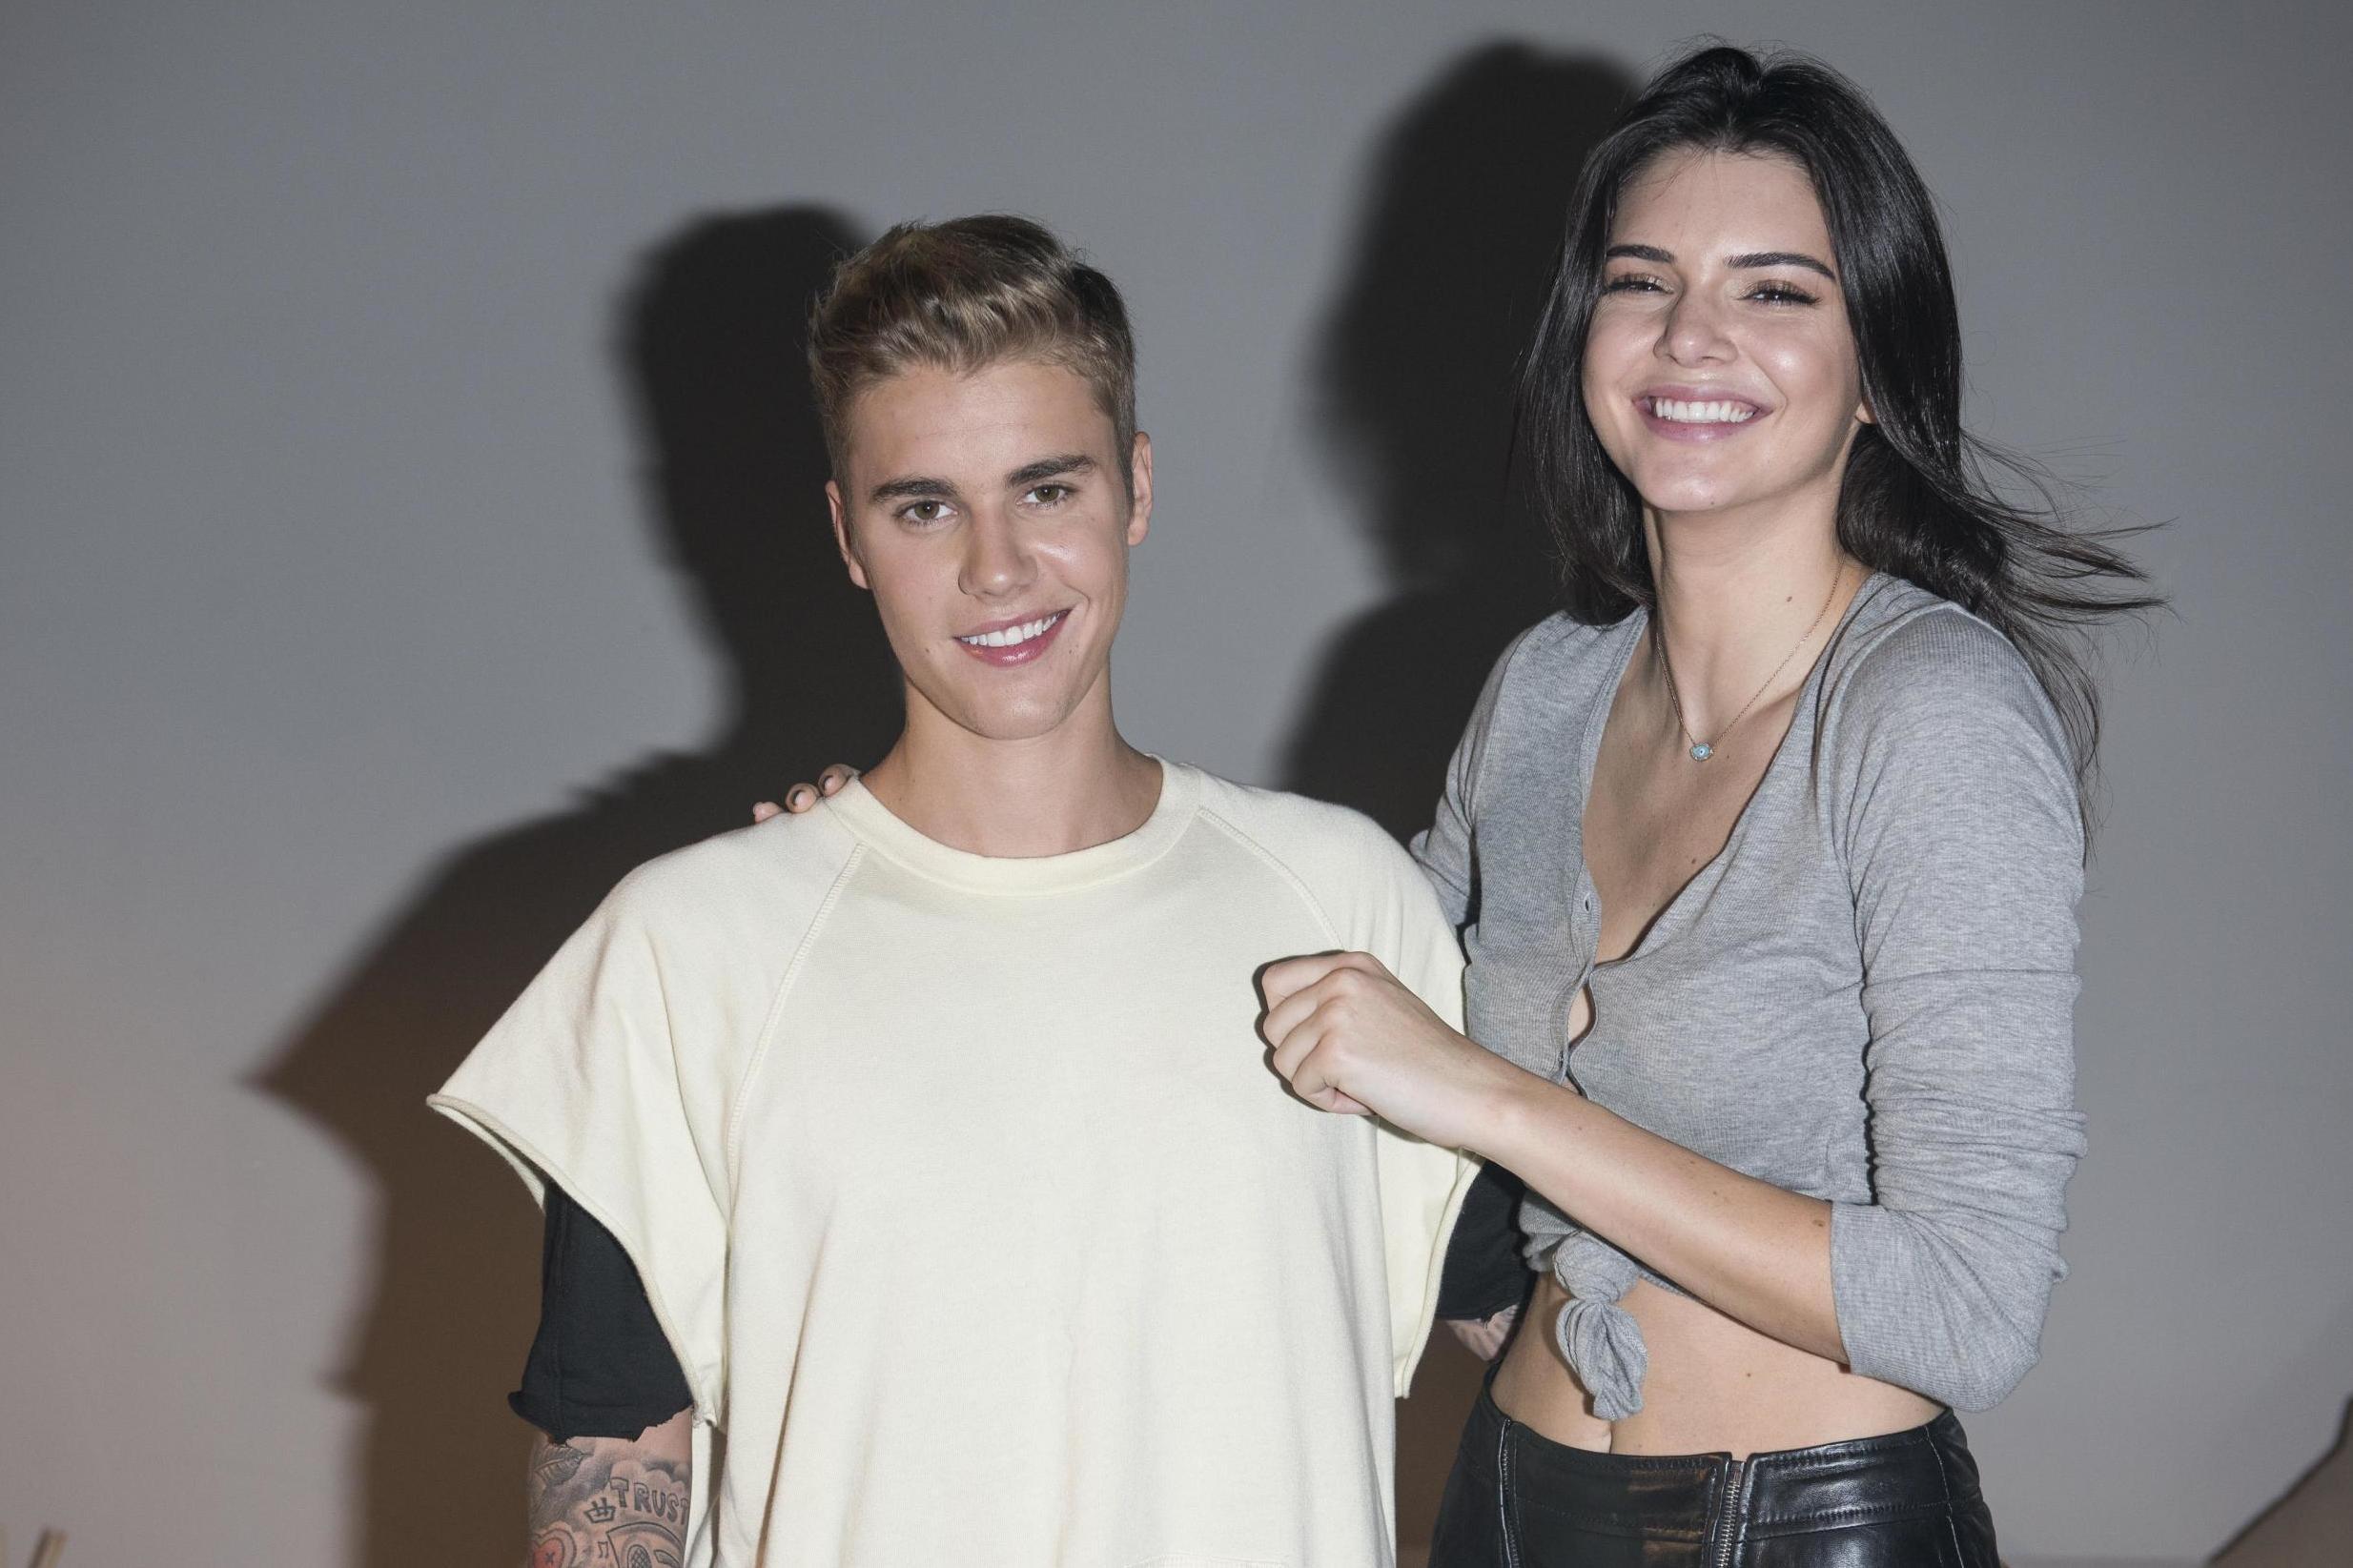 'How blessed are we': Justin Bieber and Kendall Jenner spark backlash with 'tone-deaf' Instagram Live